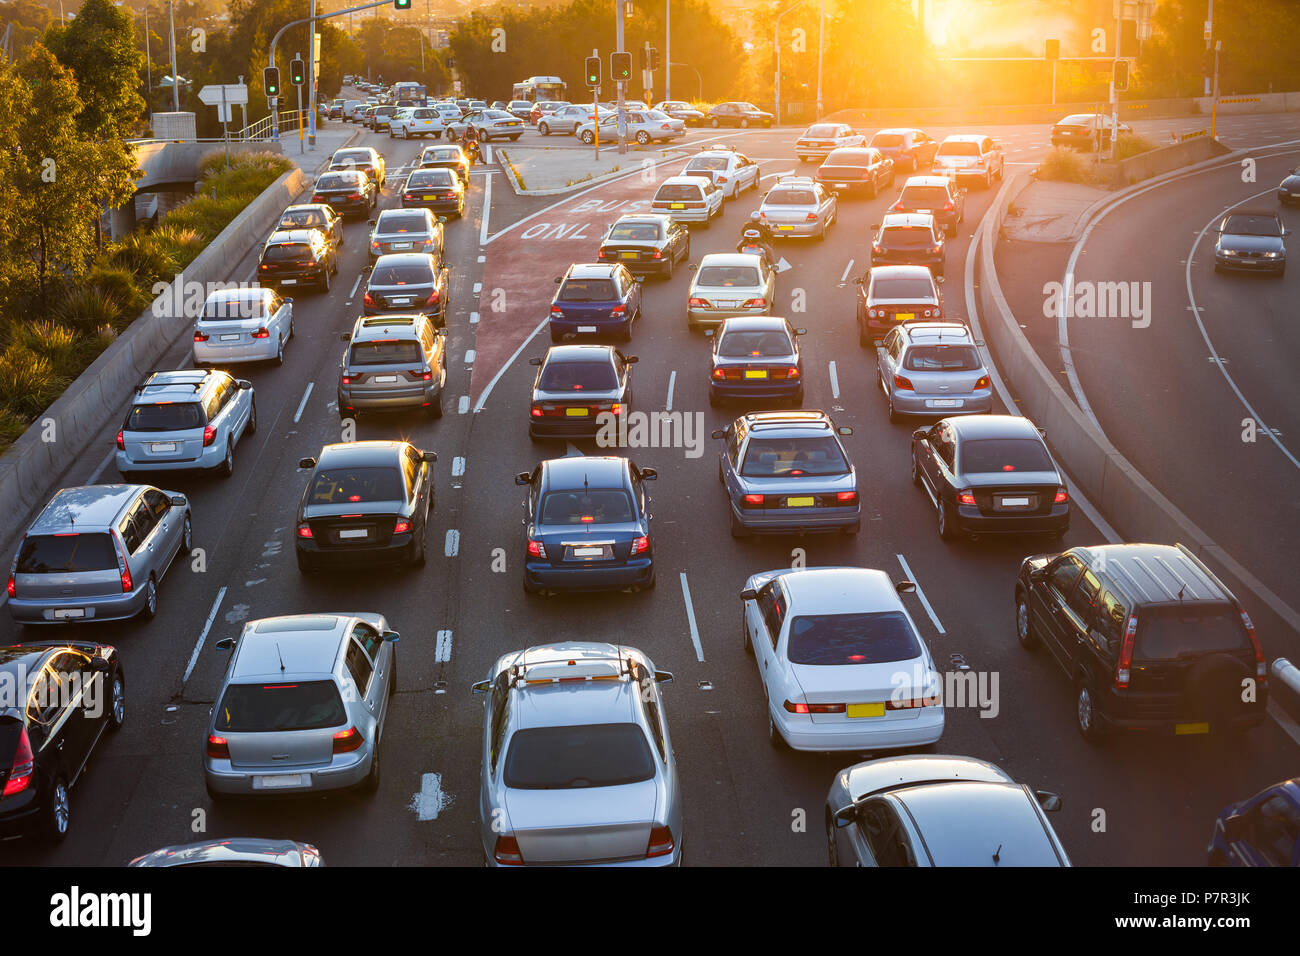 Cars stuck in traffic at an intersection Stock Photo